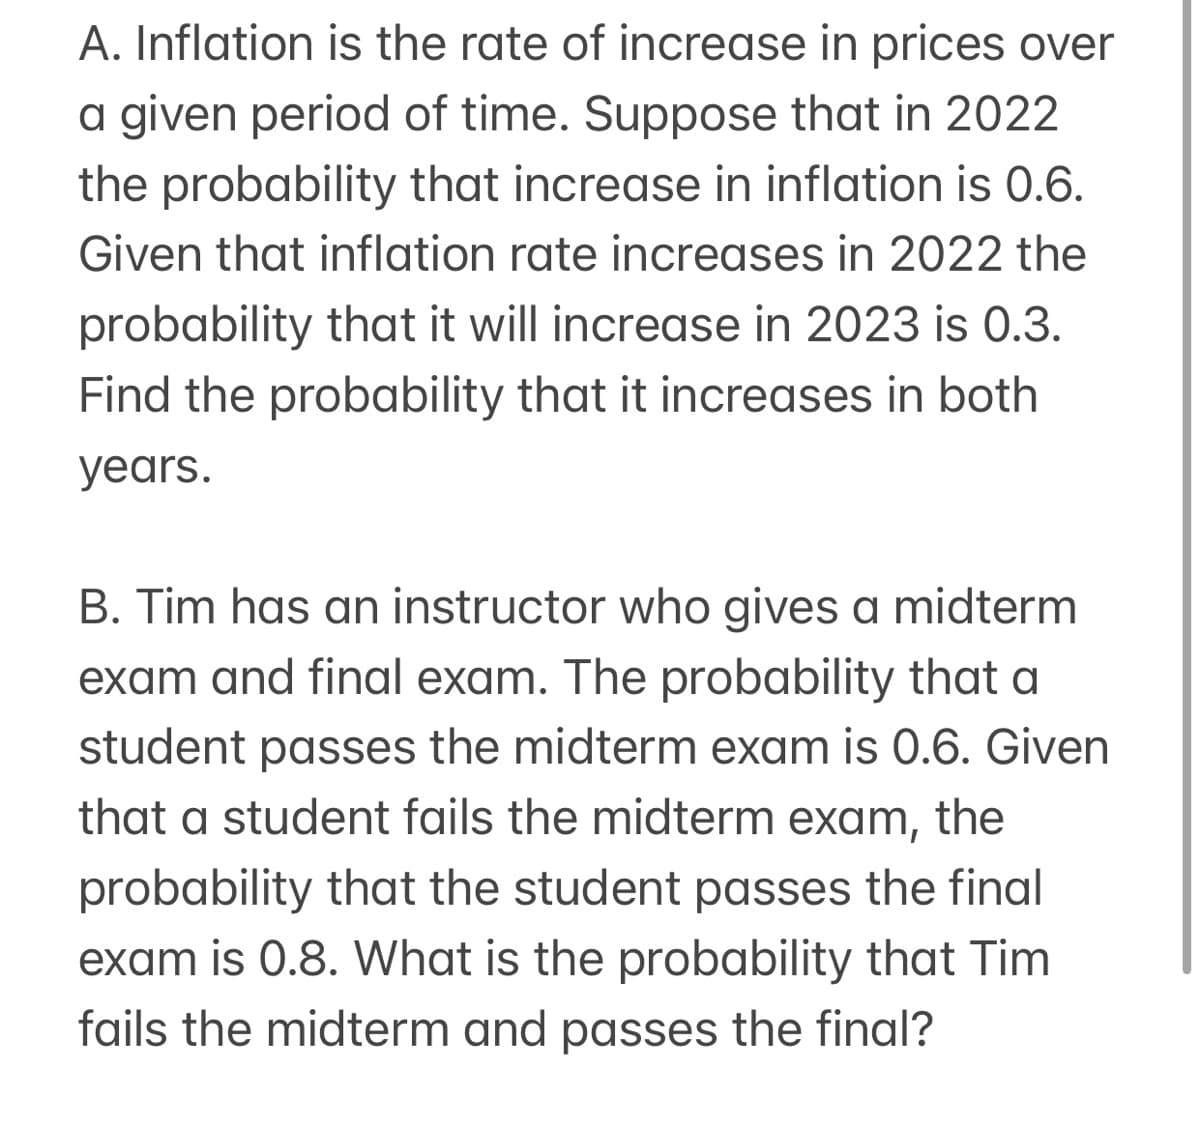 A. Inflation is the rate of increase in prices over
a given period of time. Suppose that in 2022
the probability that increase in inflation is 0.6.
Given that inflation rate increases in 2022 the
probability that it will increase in 2023 is 0.3.
Find the probability that it increases in both
years.
B. Tim has an instructor who gives a midterm
exam and final exam. The probability that a
student passes the midterm exam is 0.6. Given
that a student fails the midterm exam, the
probability that the student passes the final
exam is 0.8. What is the probability that Tim
fails the midterm and passes the final?